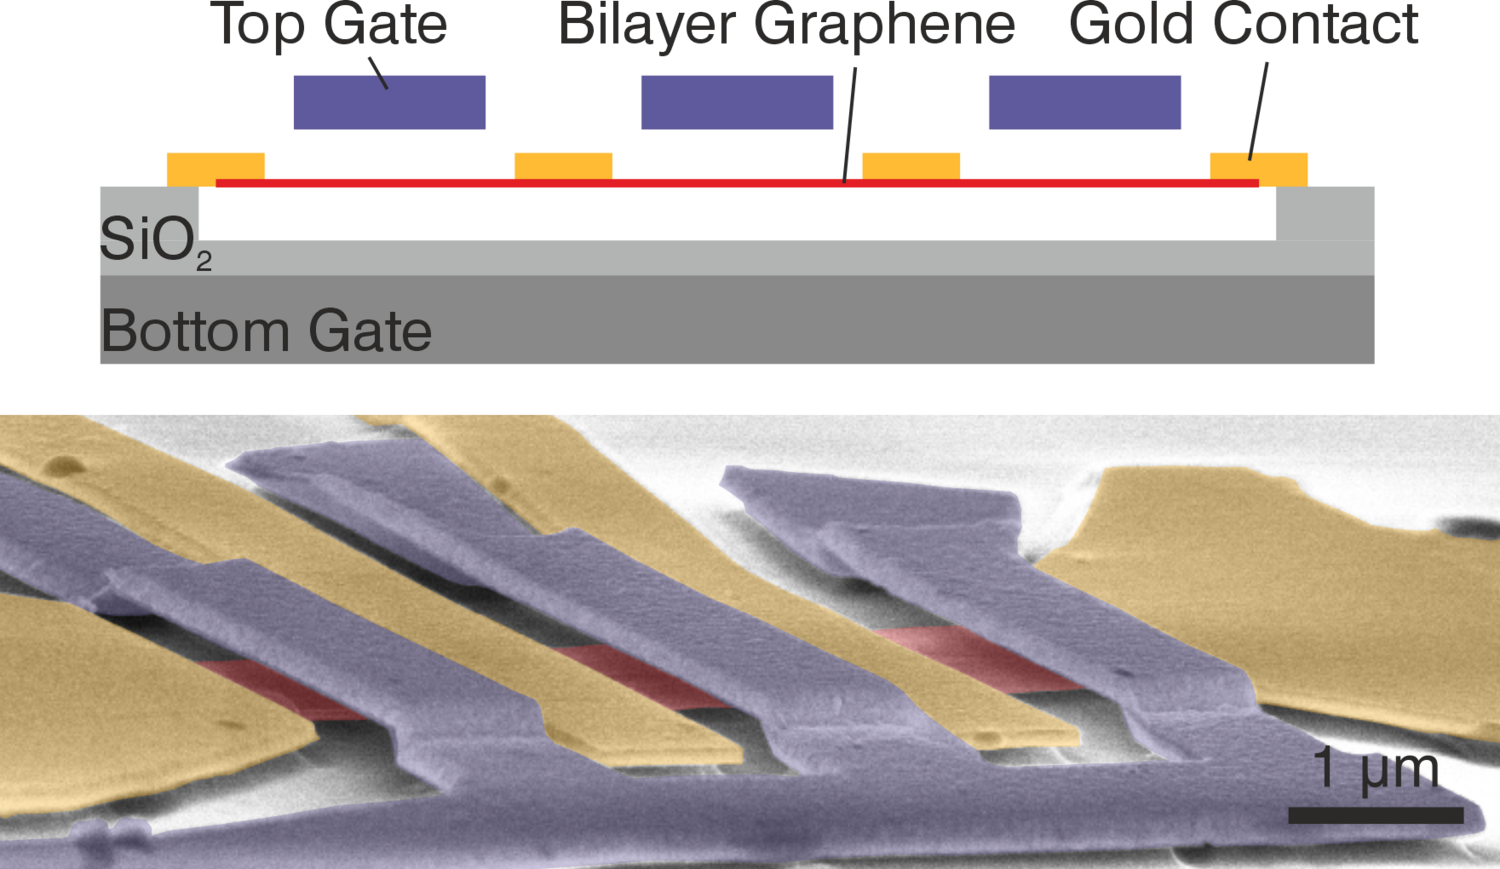 The gold contacts are shown as yellow, the graphene double layers red, and the metal bridge blue.